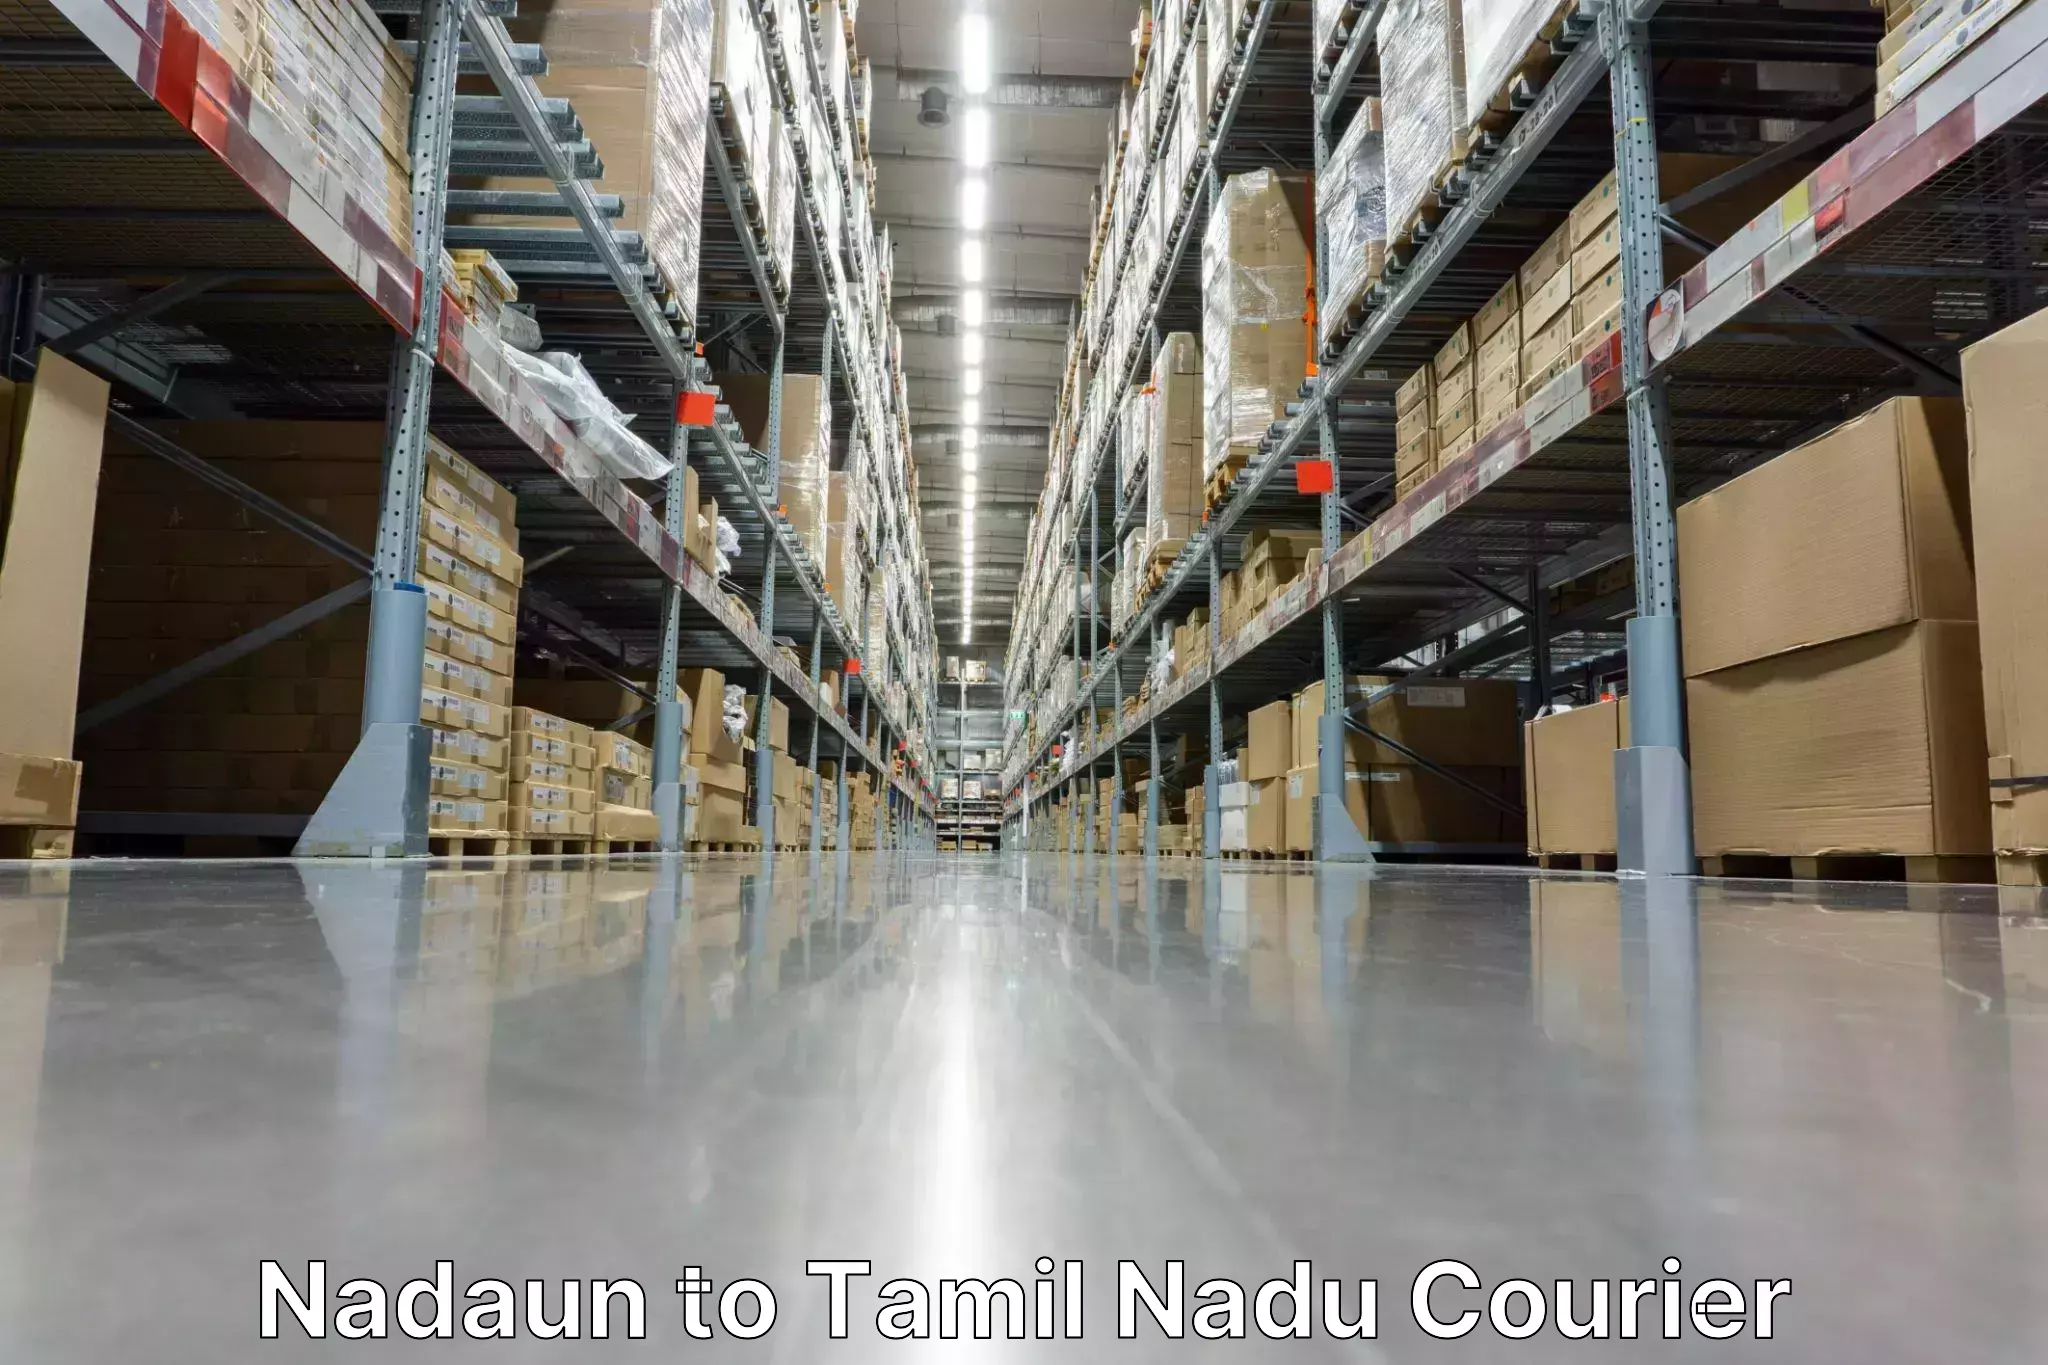 Quality courier partnerships Nadaun to Ennore Port Chennai